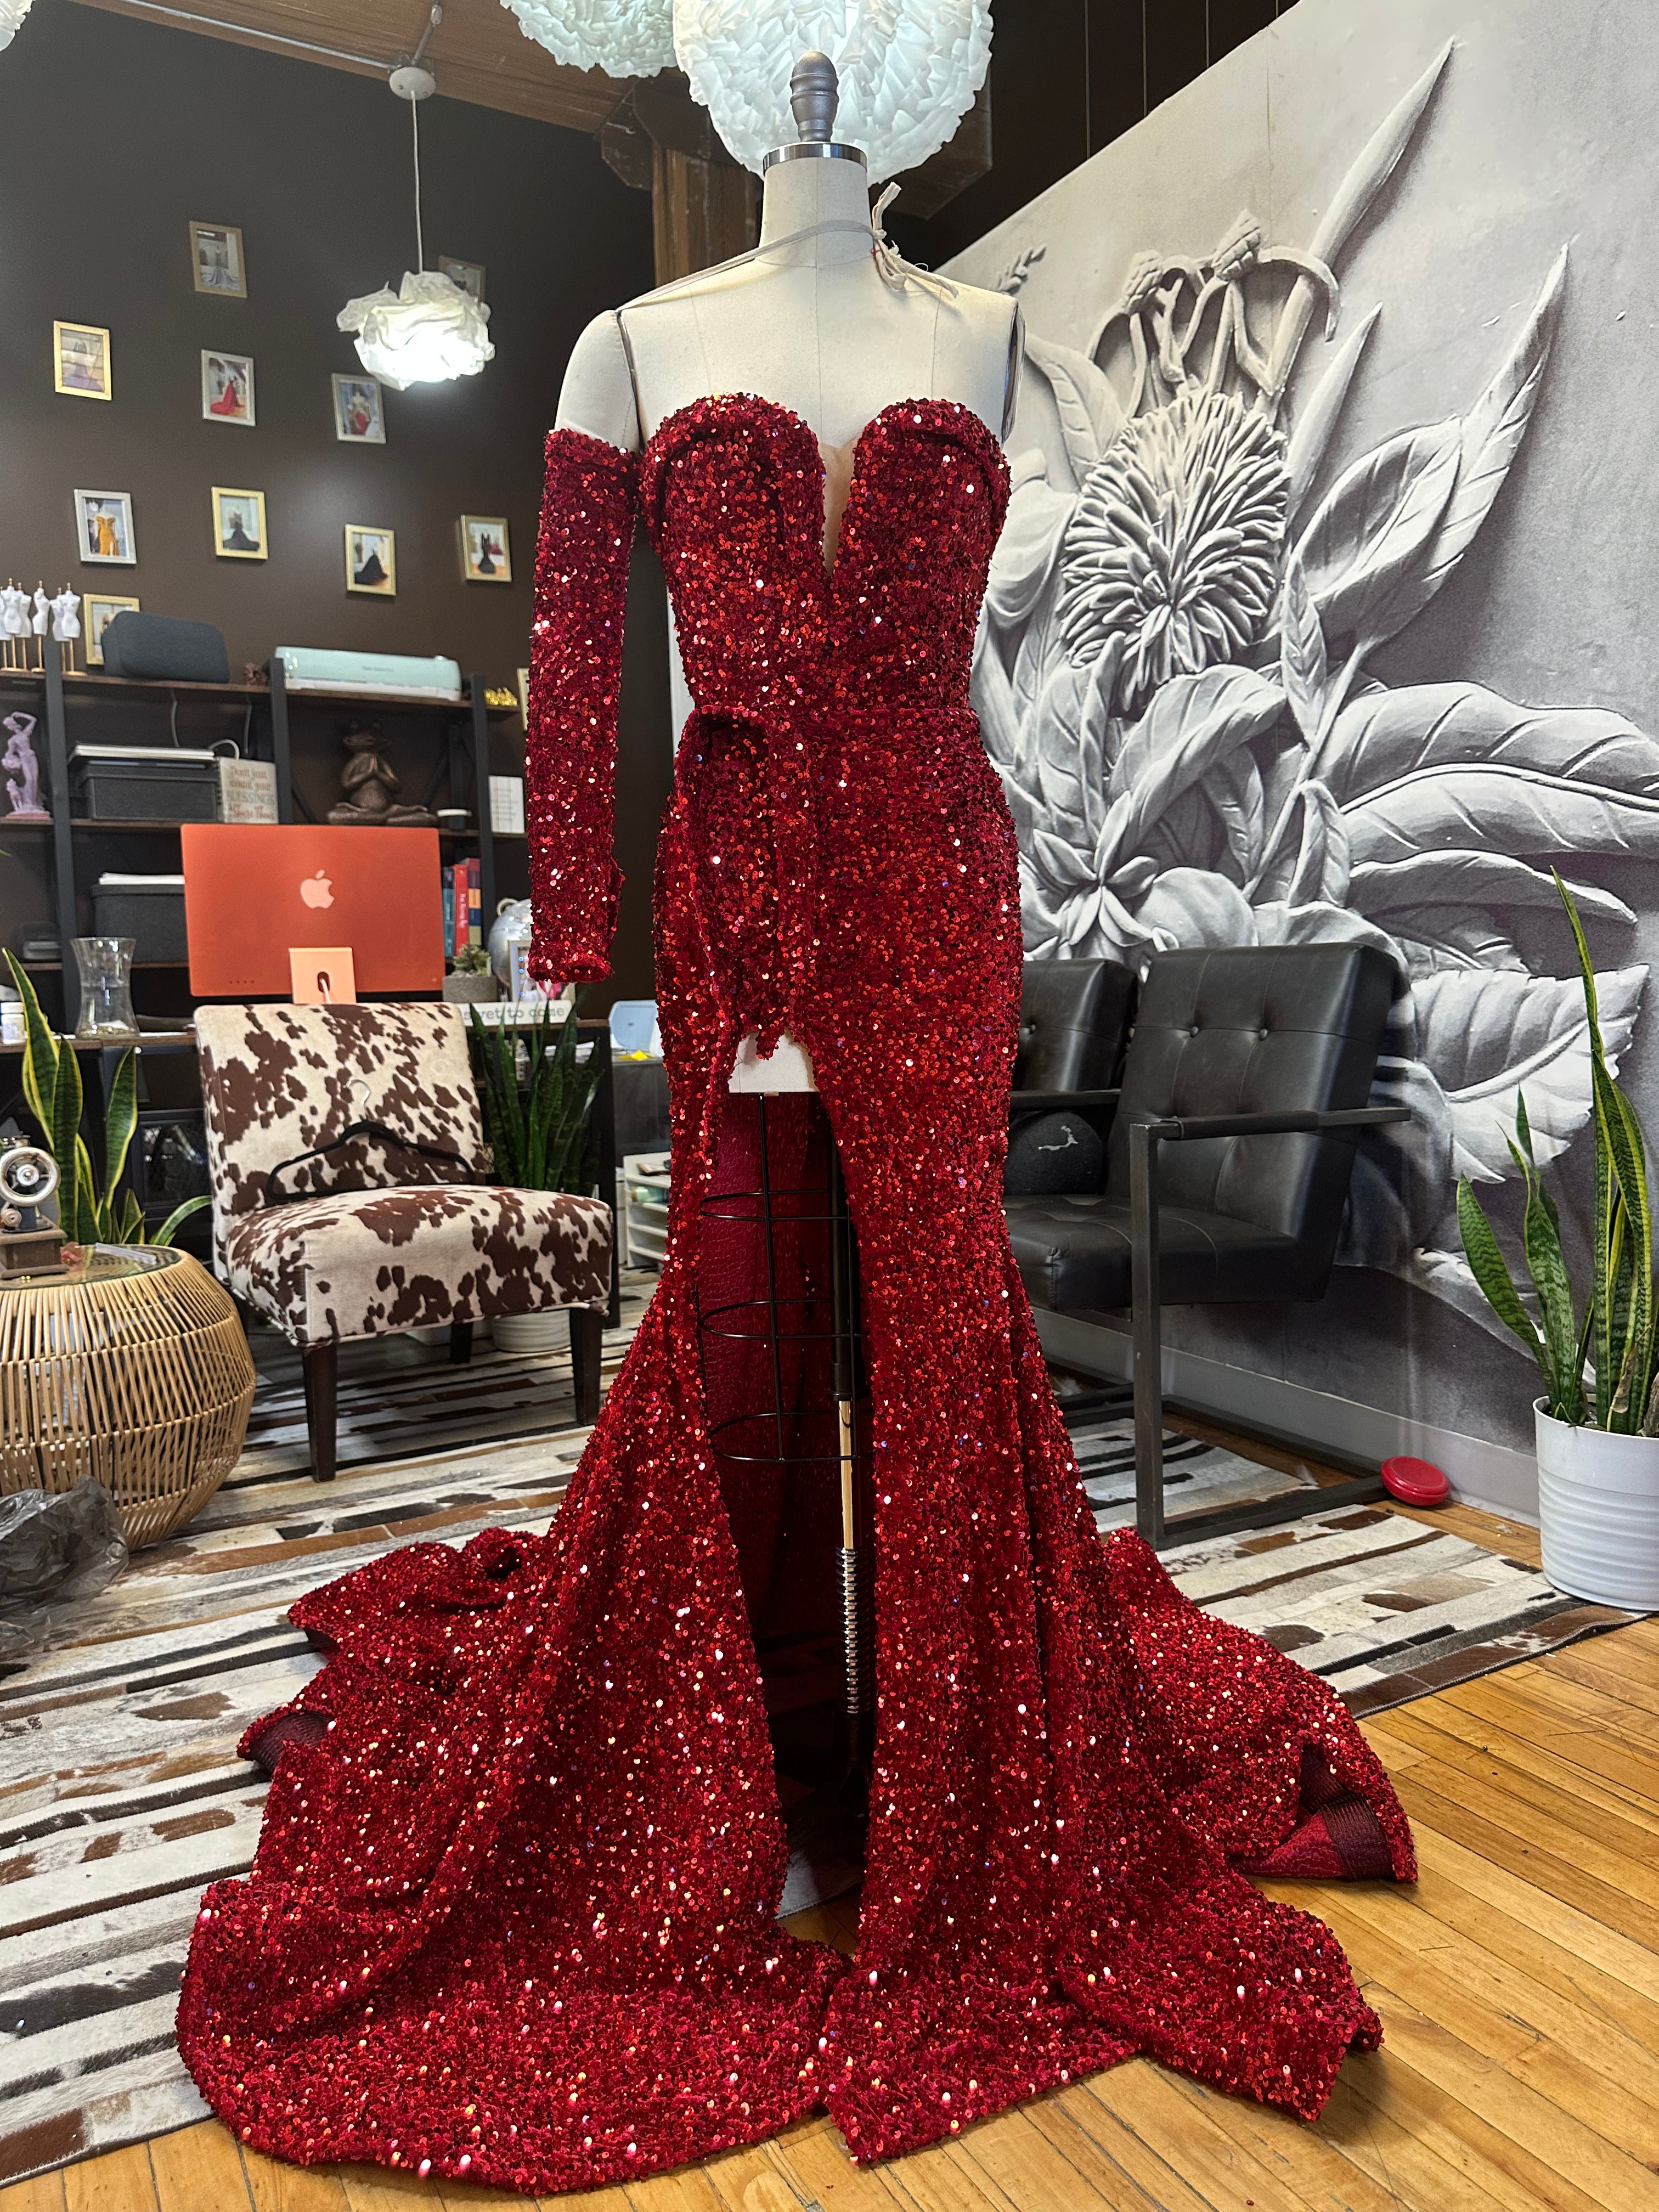 Sparkling Opulence  Red Sequin Corset Set with a Slip and Gloves.